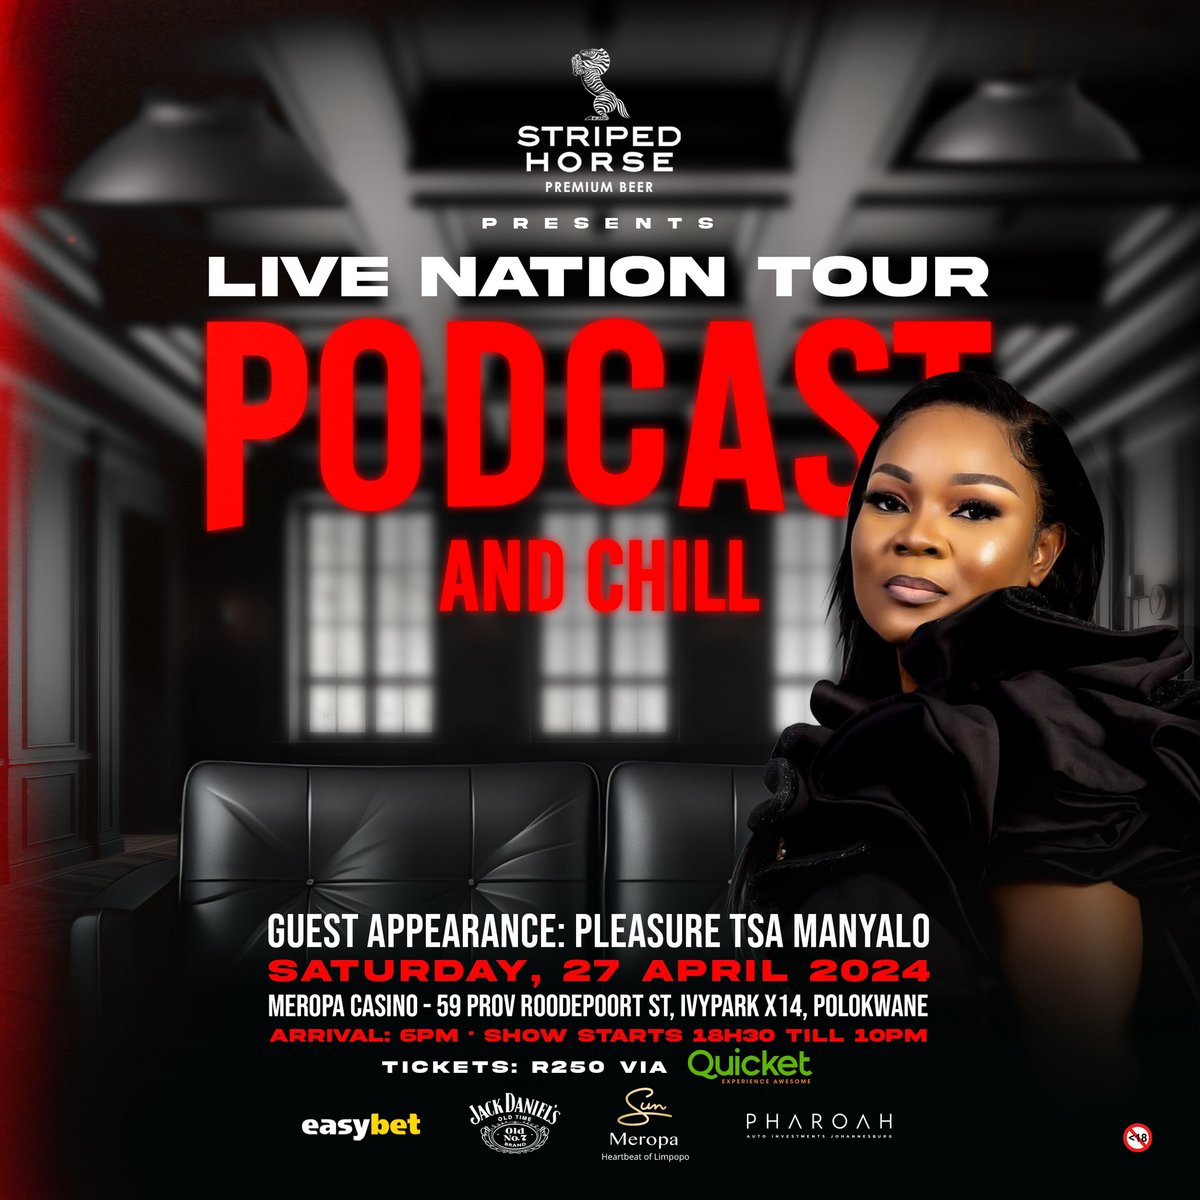 Thungisani 💥Rea lenyalong this weekend🚀 so if y’all know a couple here’s a plug 🔌 #podcastandchill will be at Meropa Casino ka di 27 tsa April 📍 and we got the amazing @PleasureTsaManyalo as a guest 💃🏽 We’re practicing our STEP ✨ Are You? Secure your spot on Quicket or